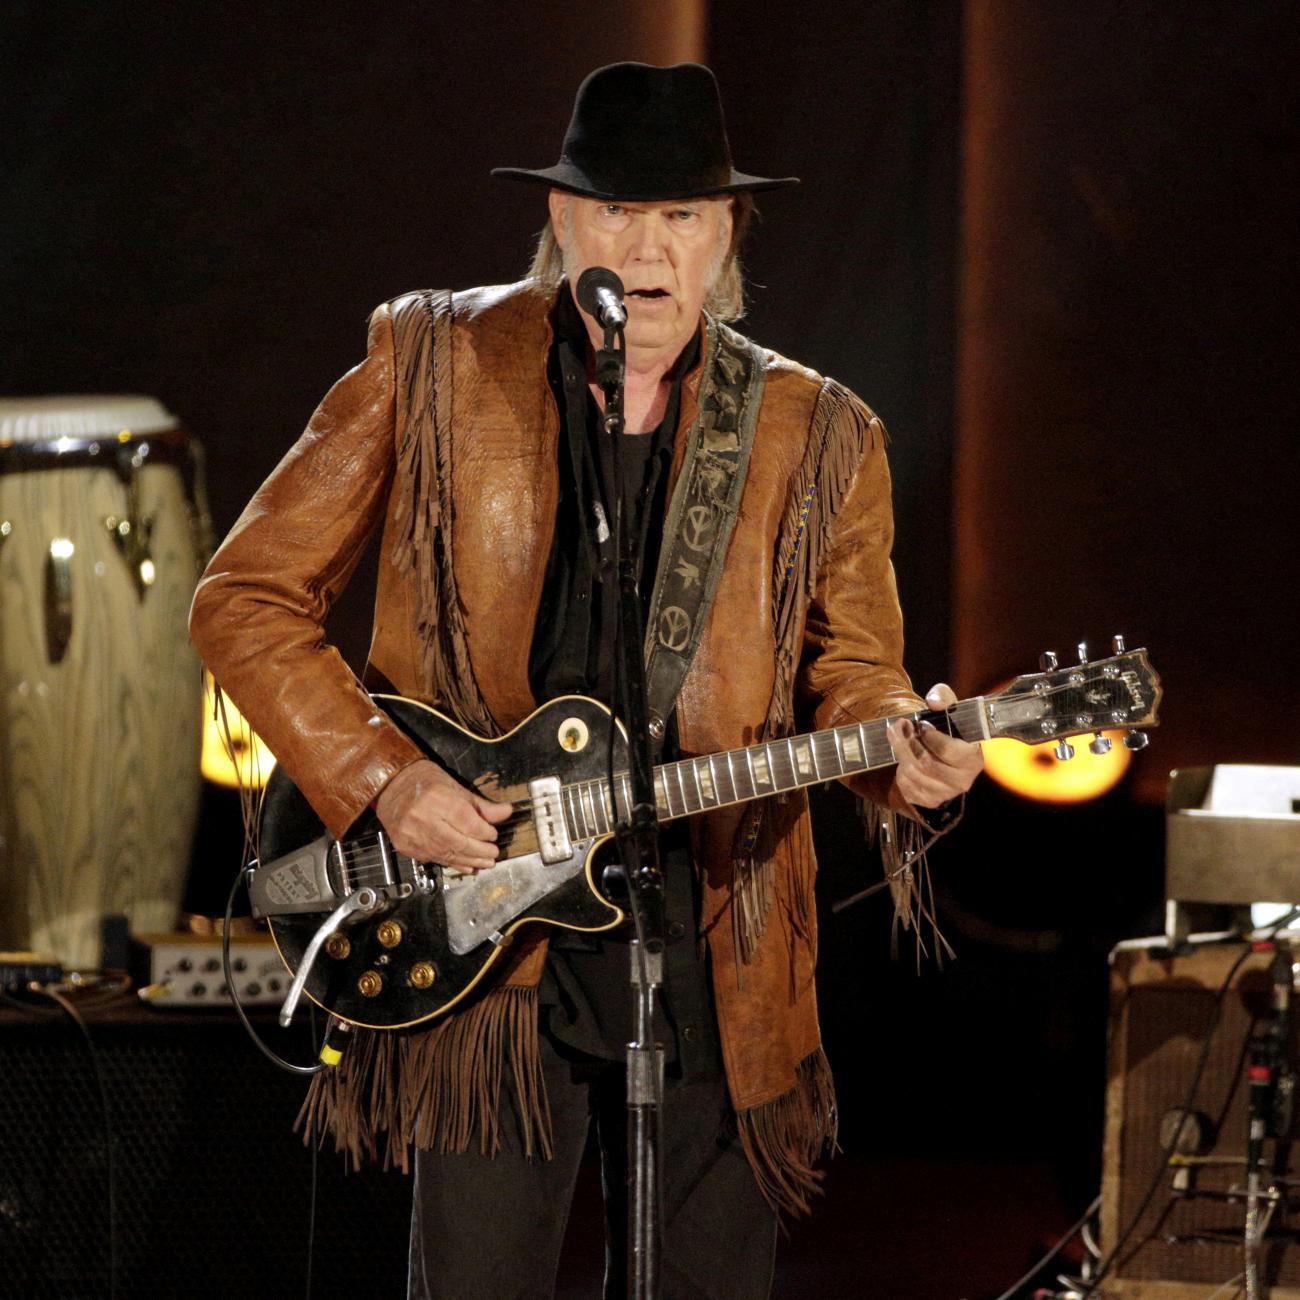 Singer-songwriter Neil Young performs on stage wearing a fringed jacket and black hat.